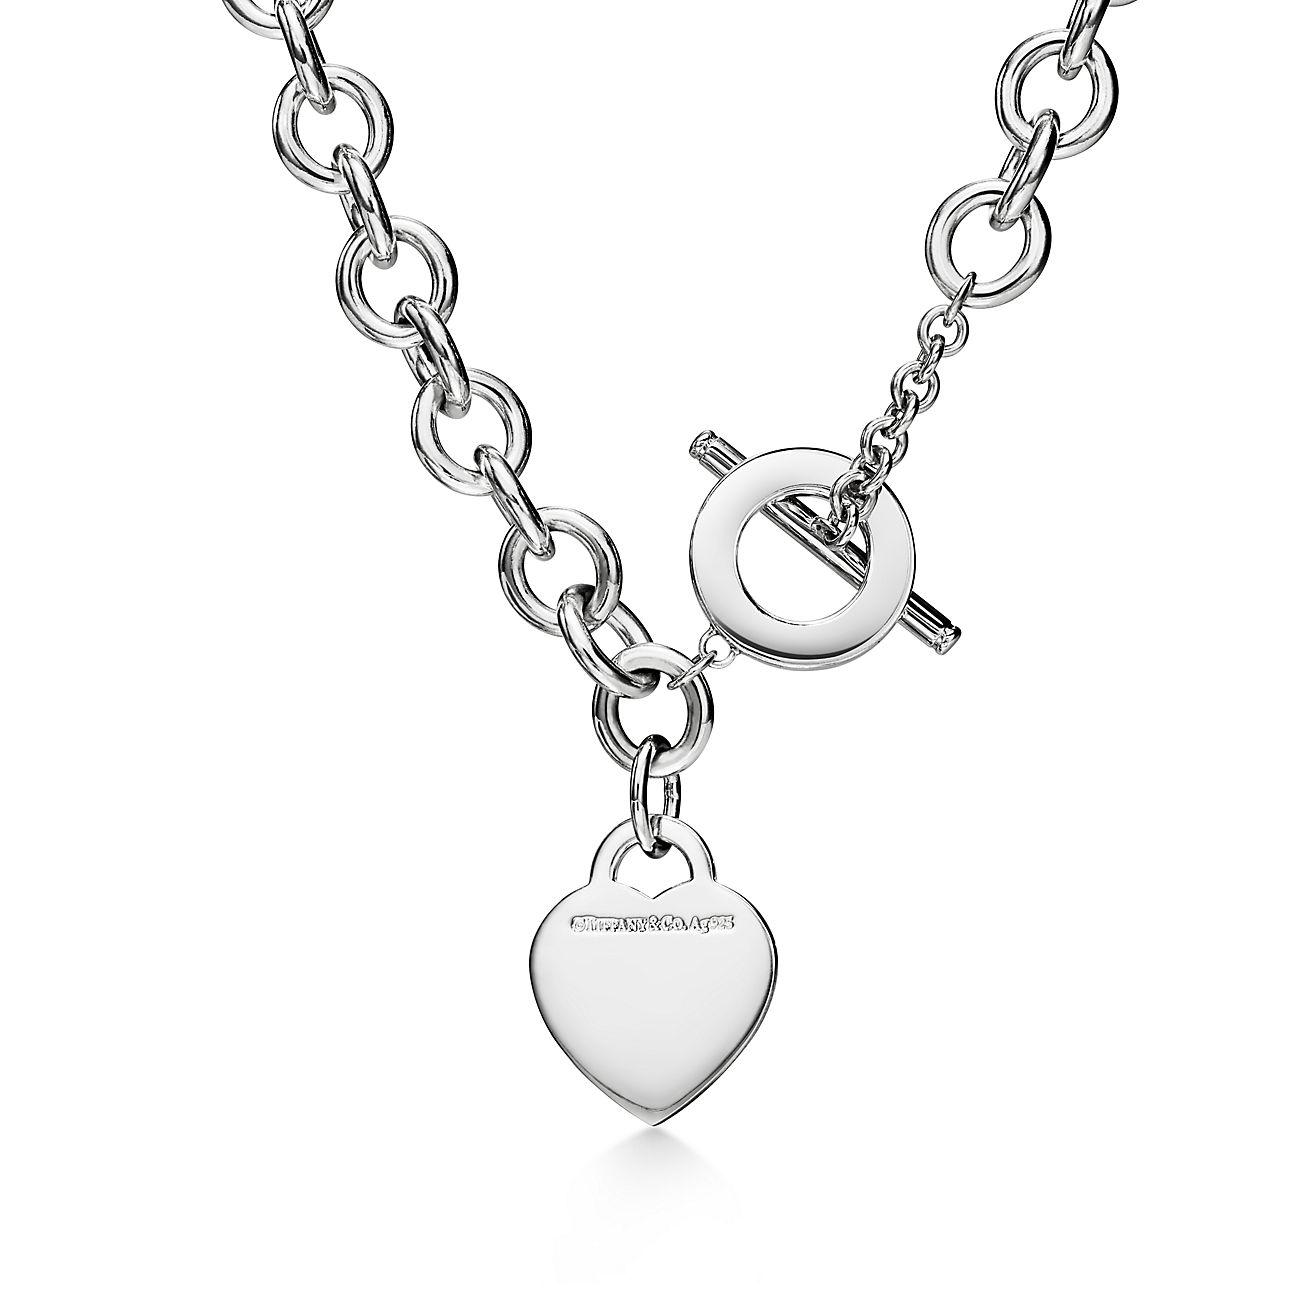 Return to Tiffany® Heart Tag and Key Necklace in Silver with a